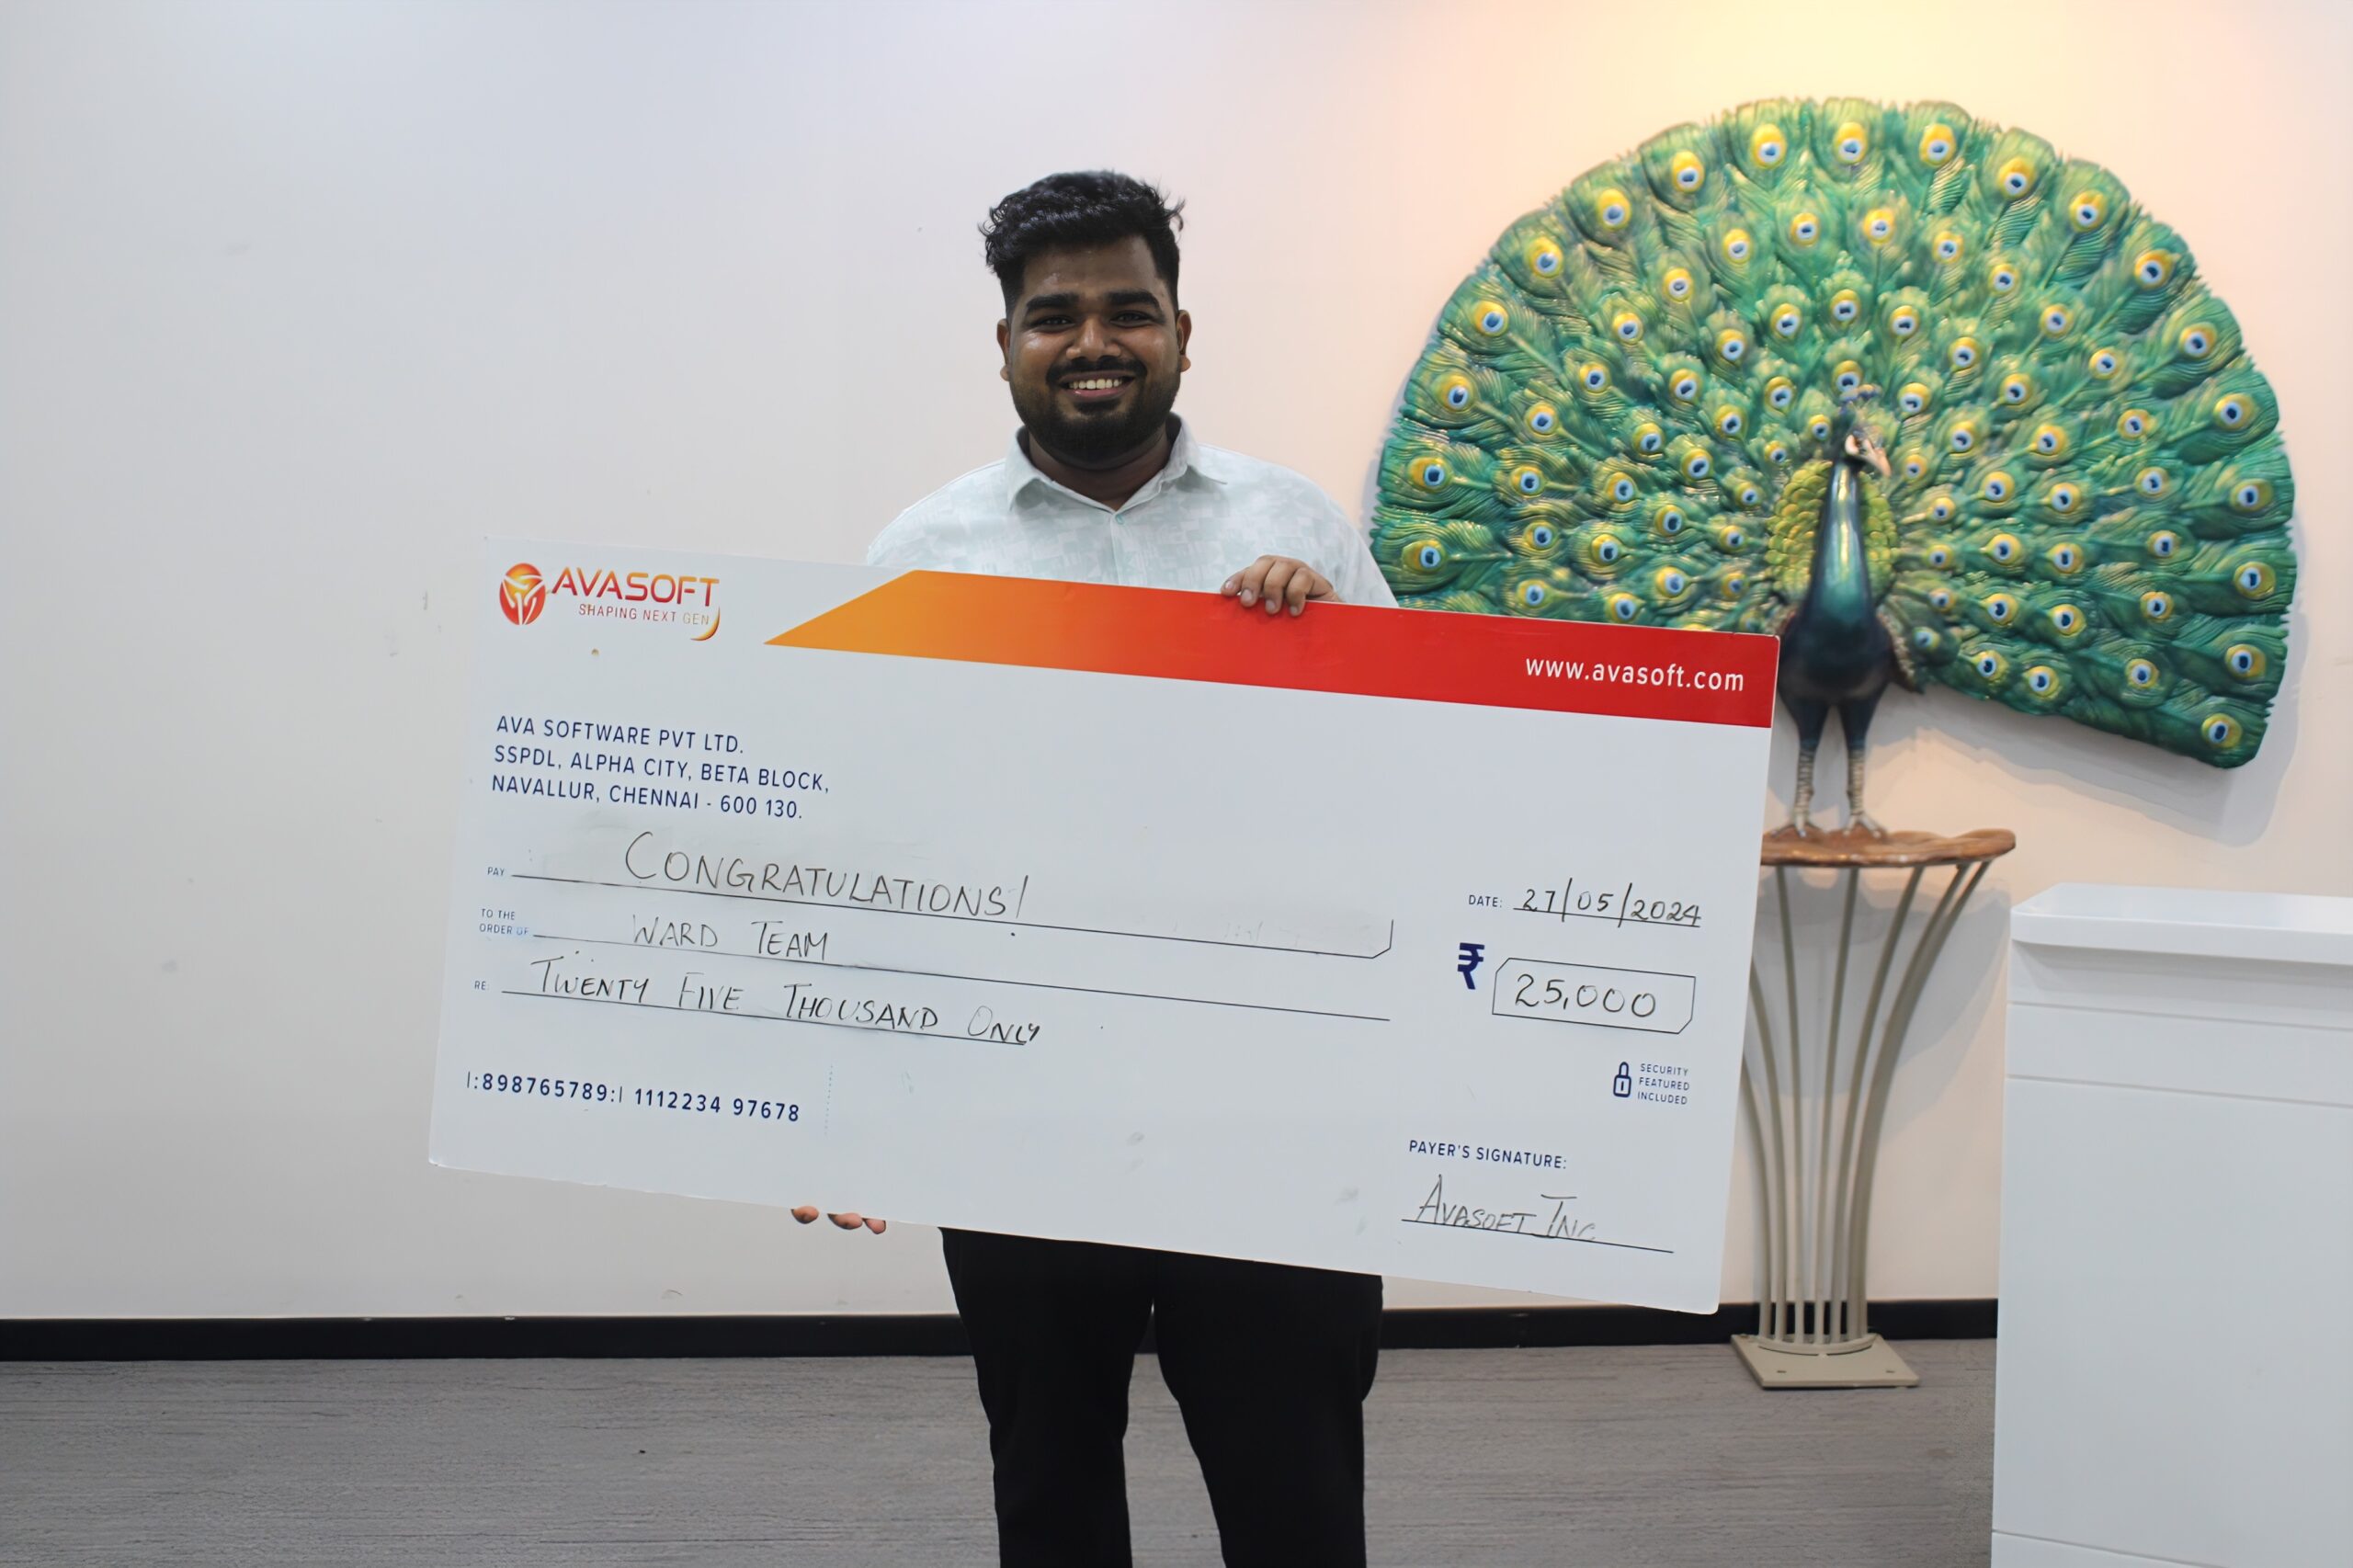 A man is smiling and holding a large check with the amount of ₹250,000, made out to a "Ward Team". The check is from AvaSoft. In the background, there is a decorative peacock artwork displayed on a wall.